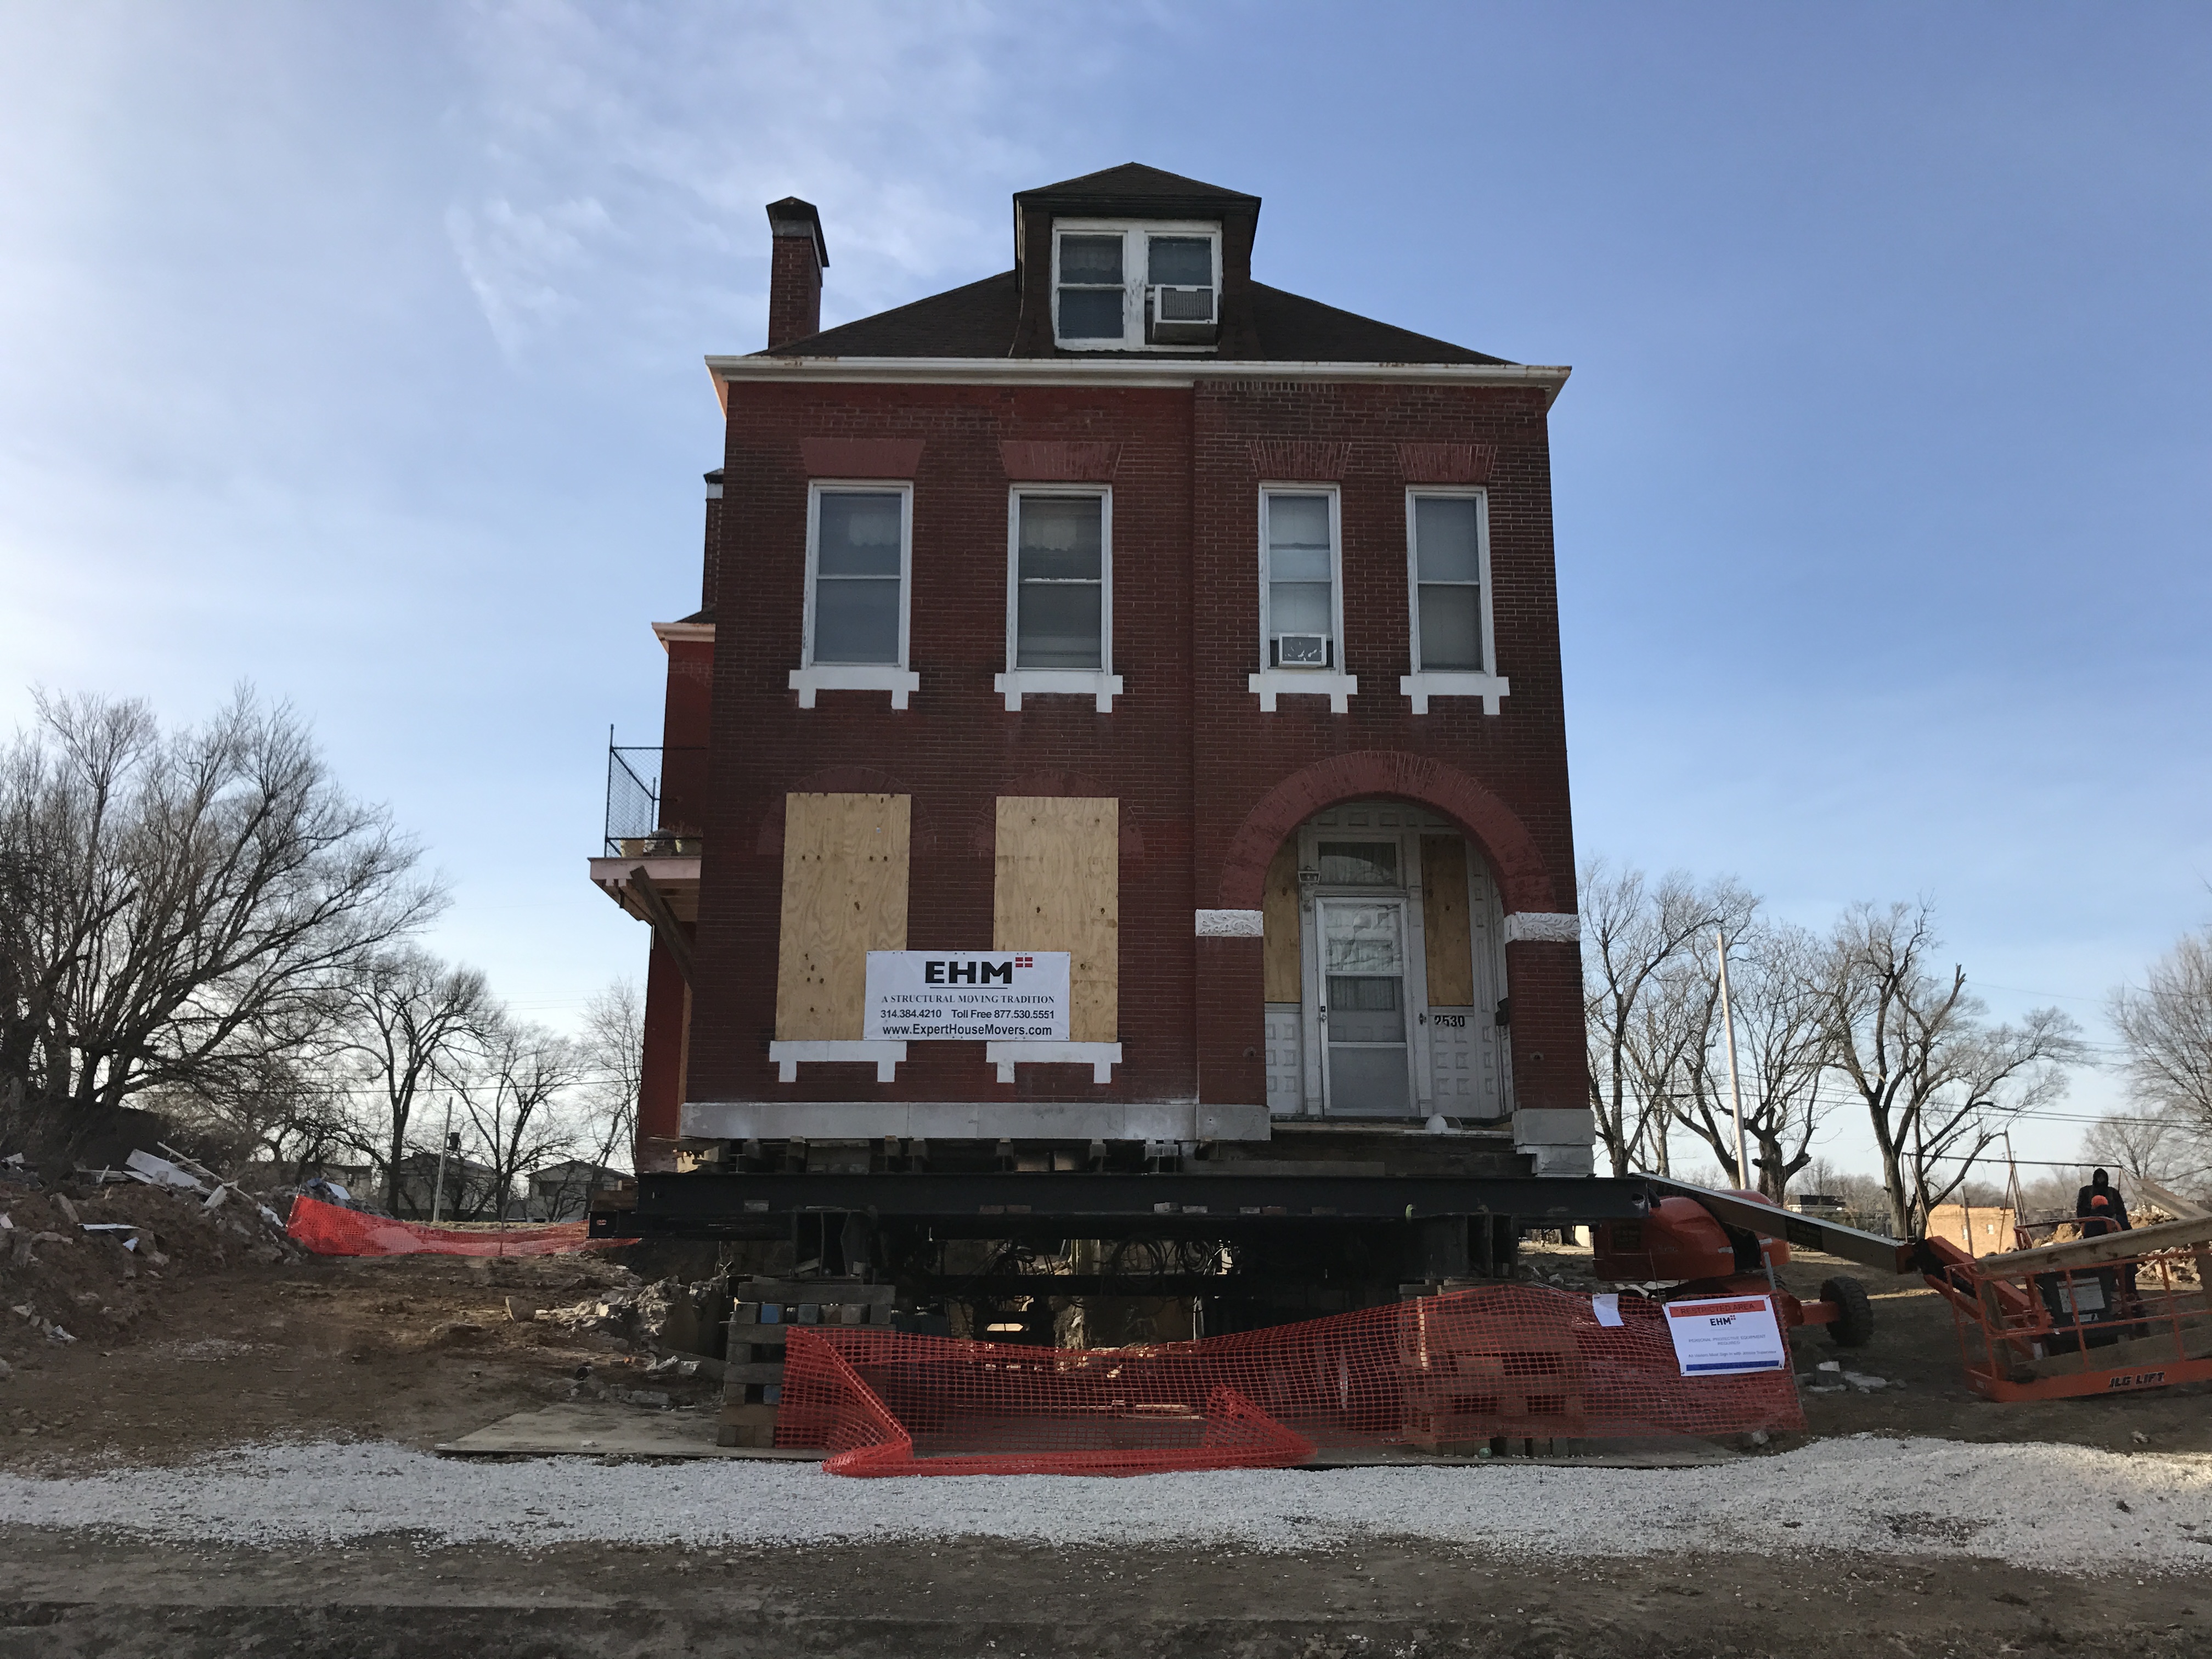 The full view of preparations to move the house at 2530 North Market Street to a new location to make way for the Next NGA site.